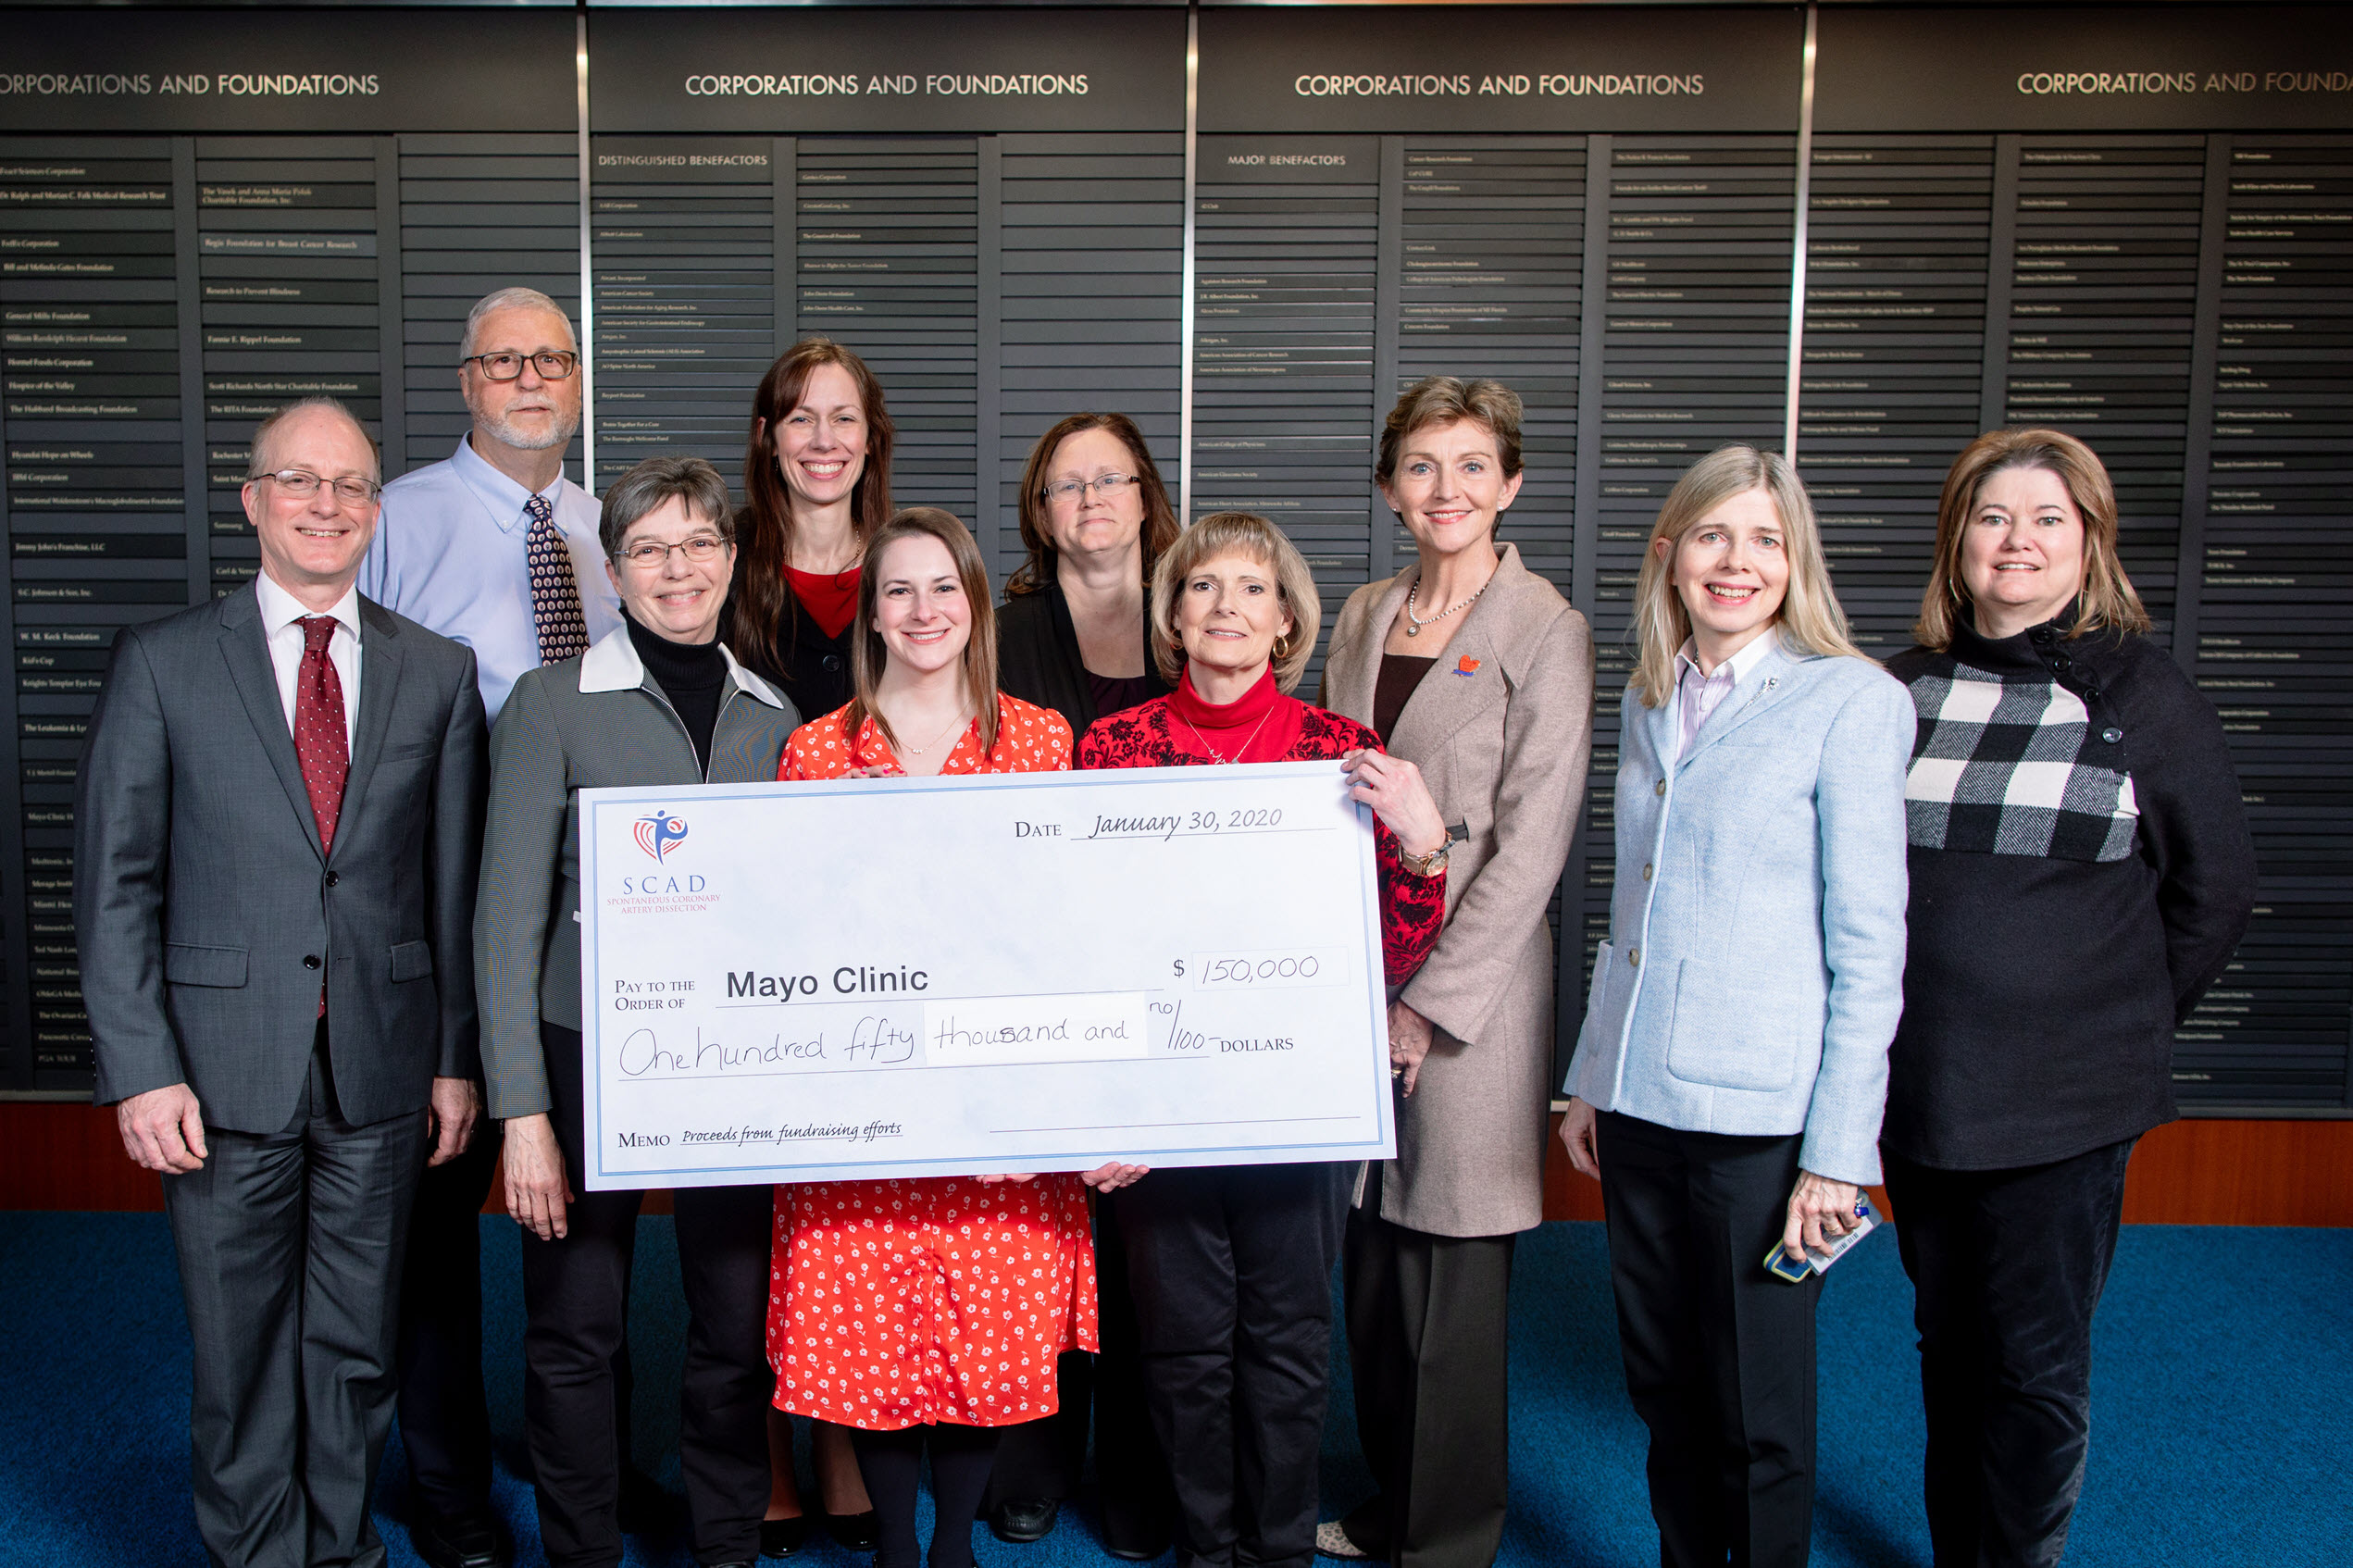 Ceremonial Check aPresented to Mayo Clinic SCAD Research Program